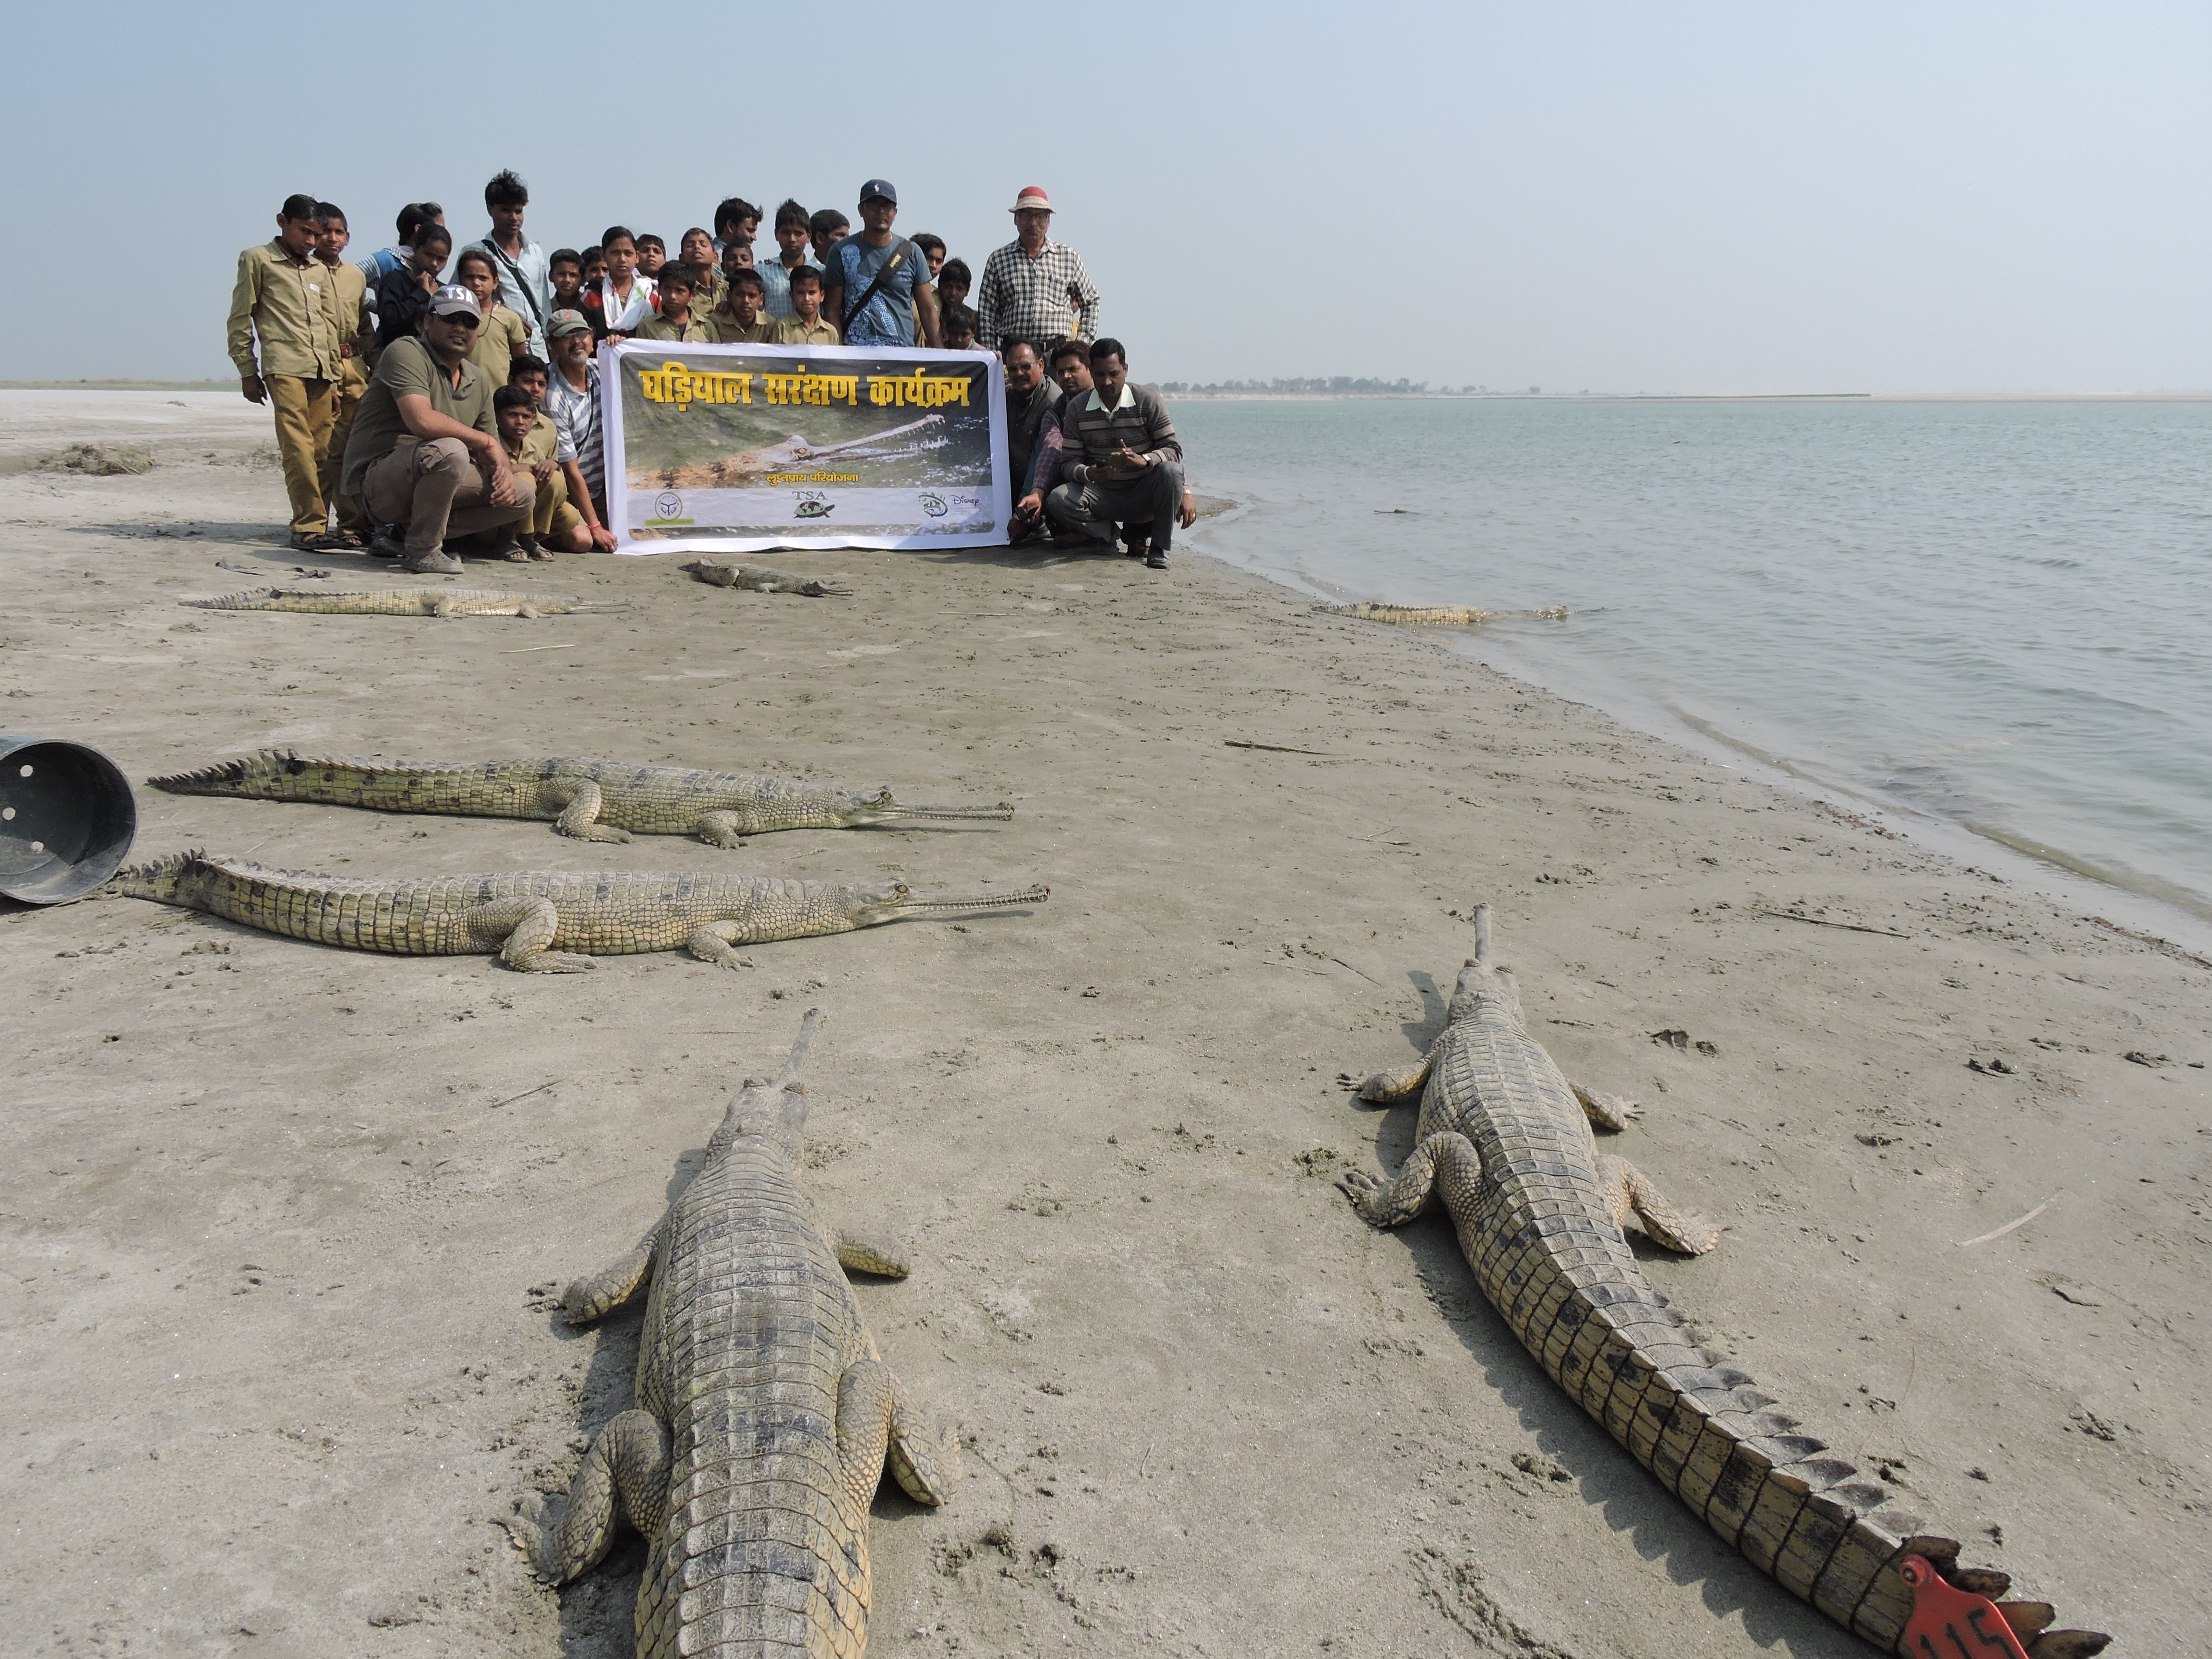 Gharial juveniles tagged and being released in the winter months